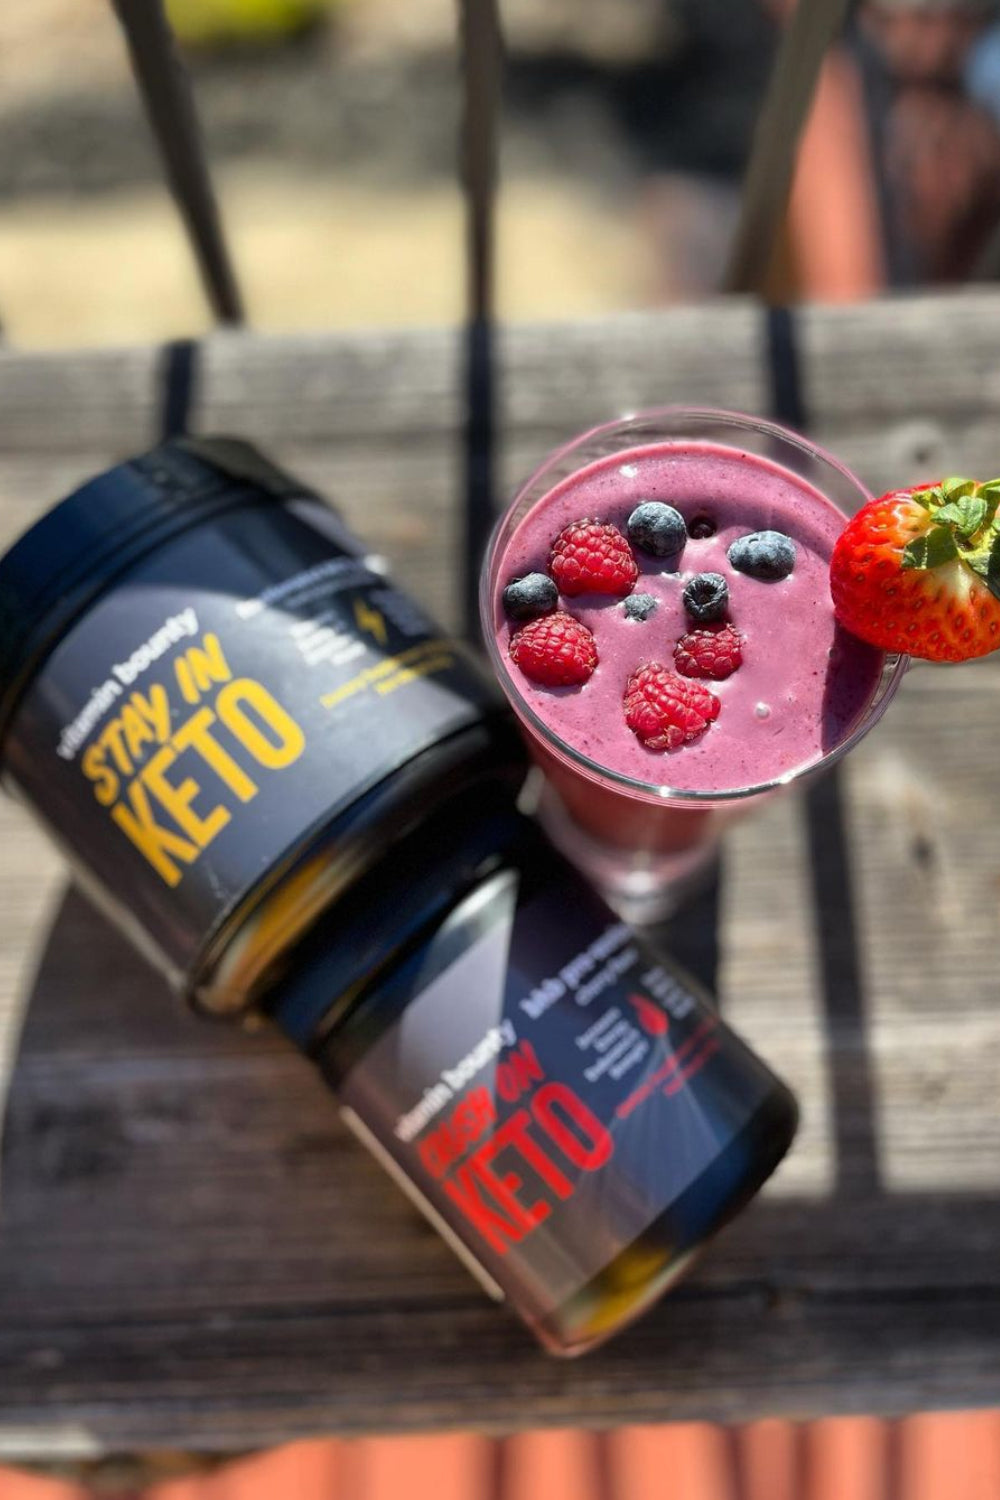 Berry smoothie using stay in keto and crush on keto from Vitamin Bounty